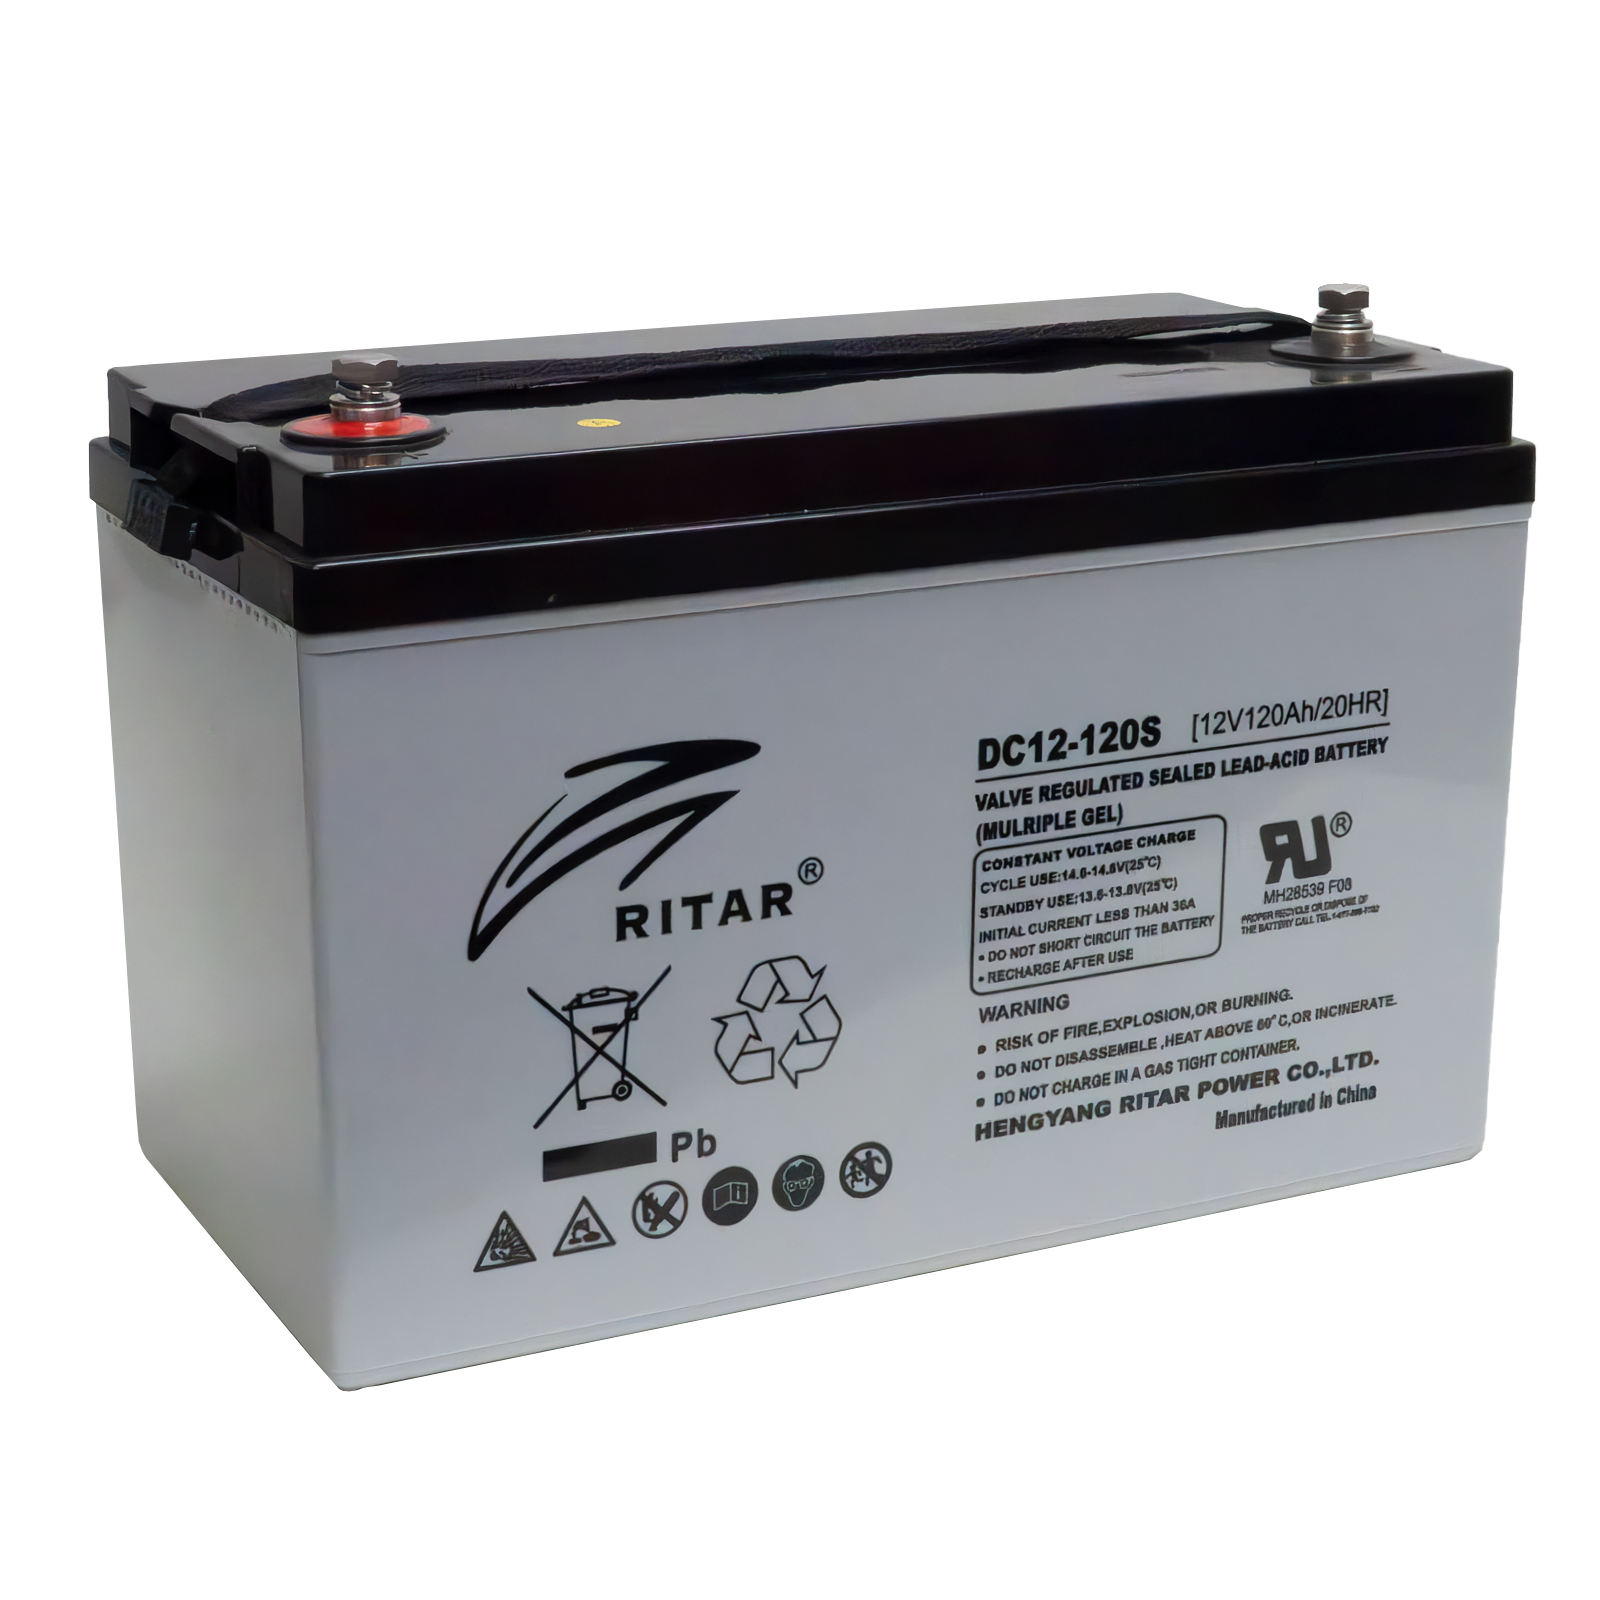 DC12-120S(RA12-120SD) Battery - High Capacity and Efficient Power Source